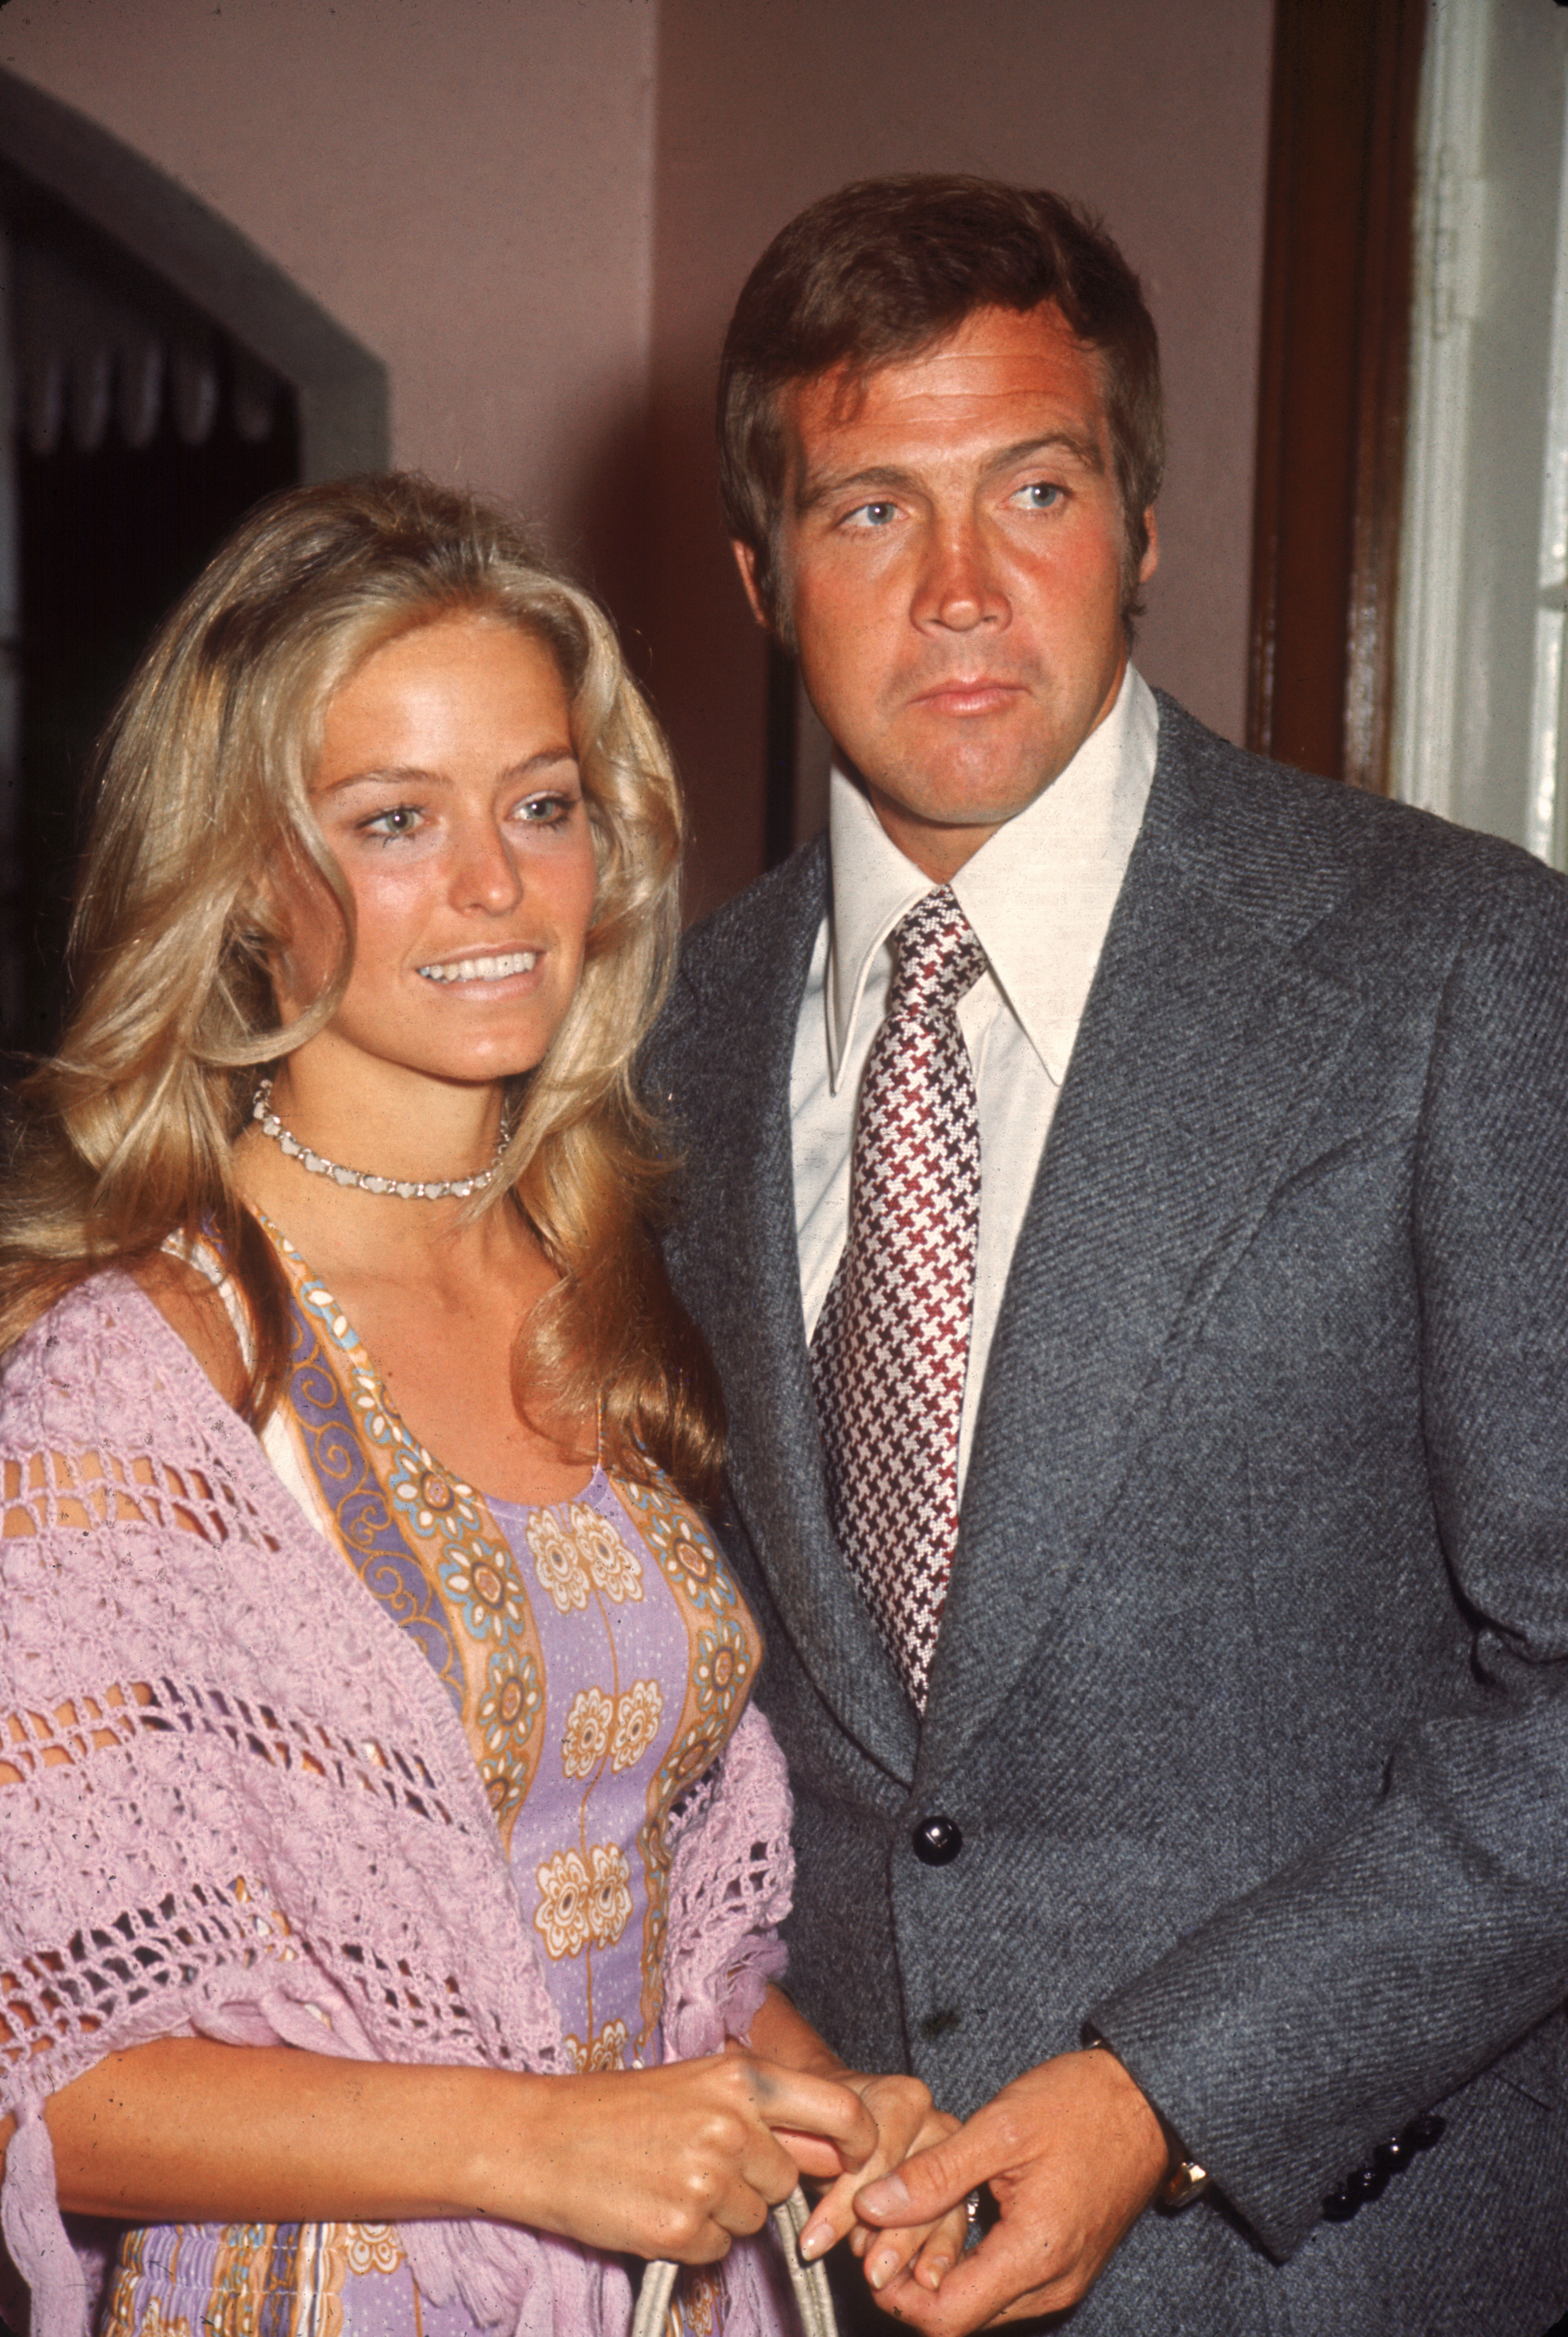 Farrah Fawcett (then known as Farrah Fawcett-Majors) (left) and Lee Majors pose together as they attend a party for ABC-TV screen celebrities in June 1971 | Source: Getty Images